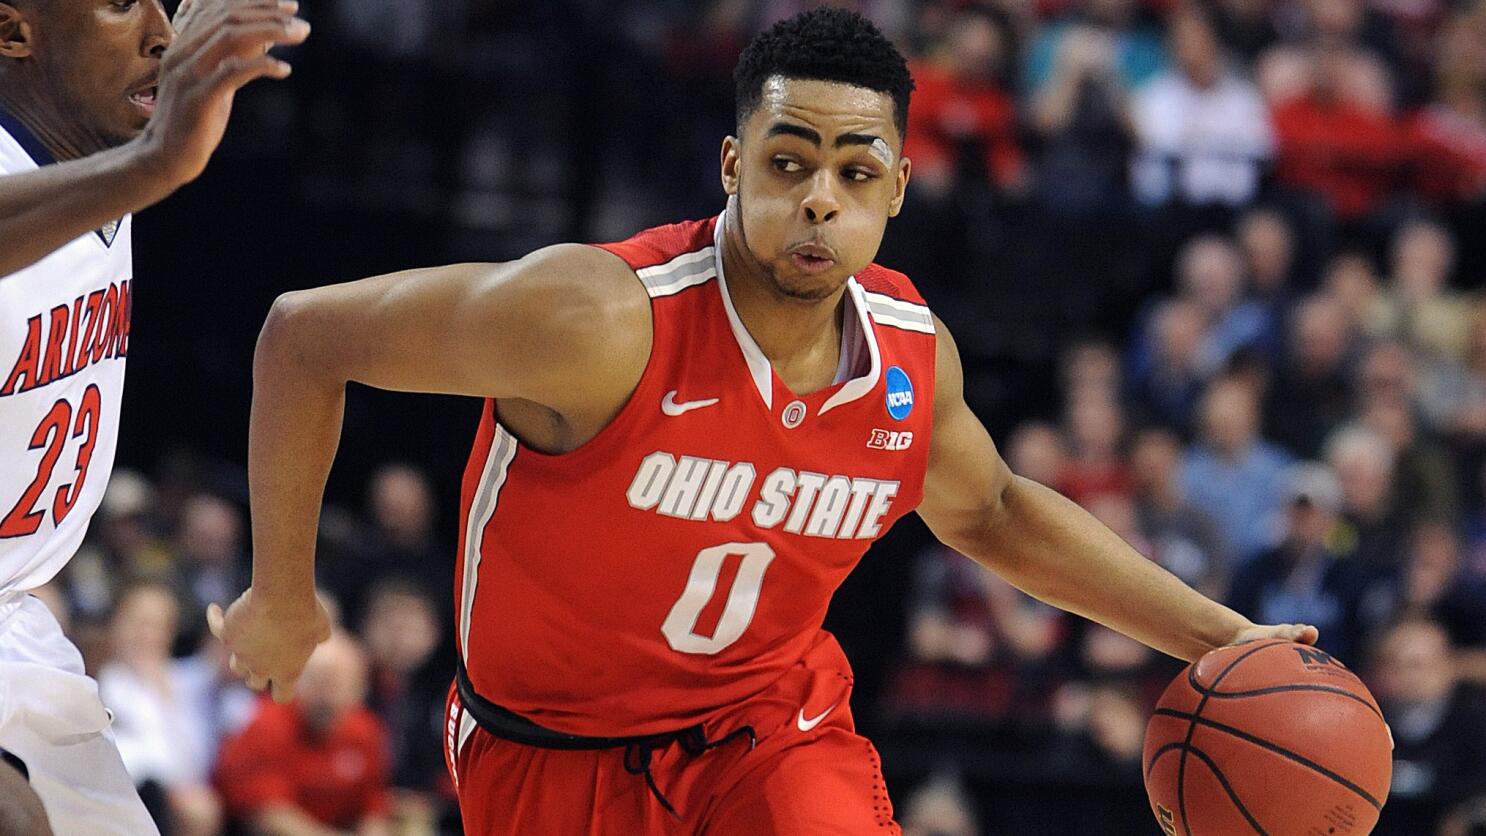 D'Angelo Russell to the Los Angeles Lakers with the No. 2 pick in